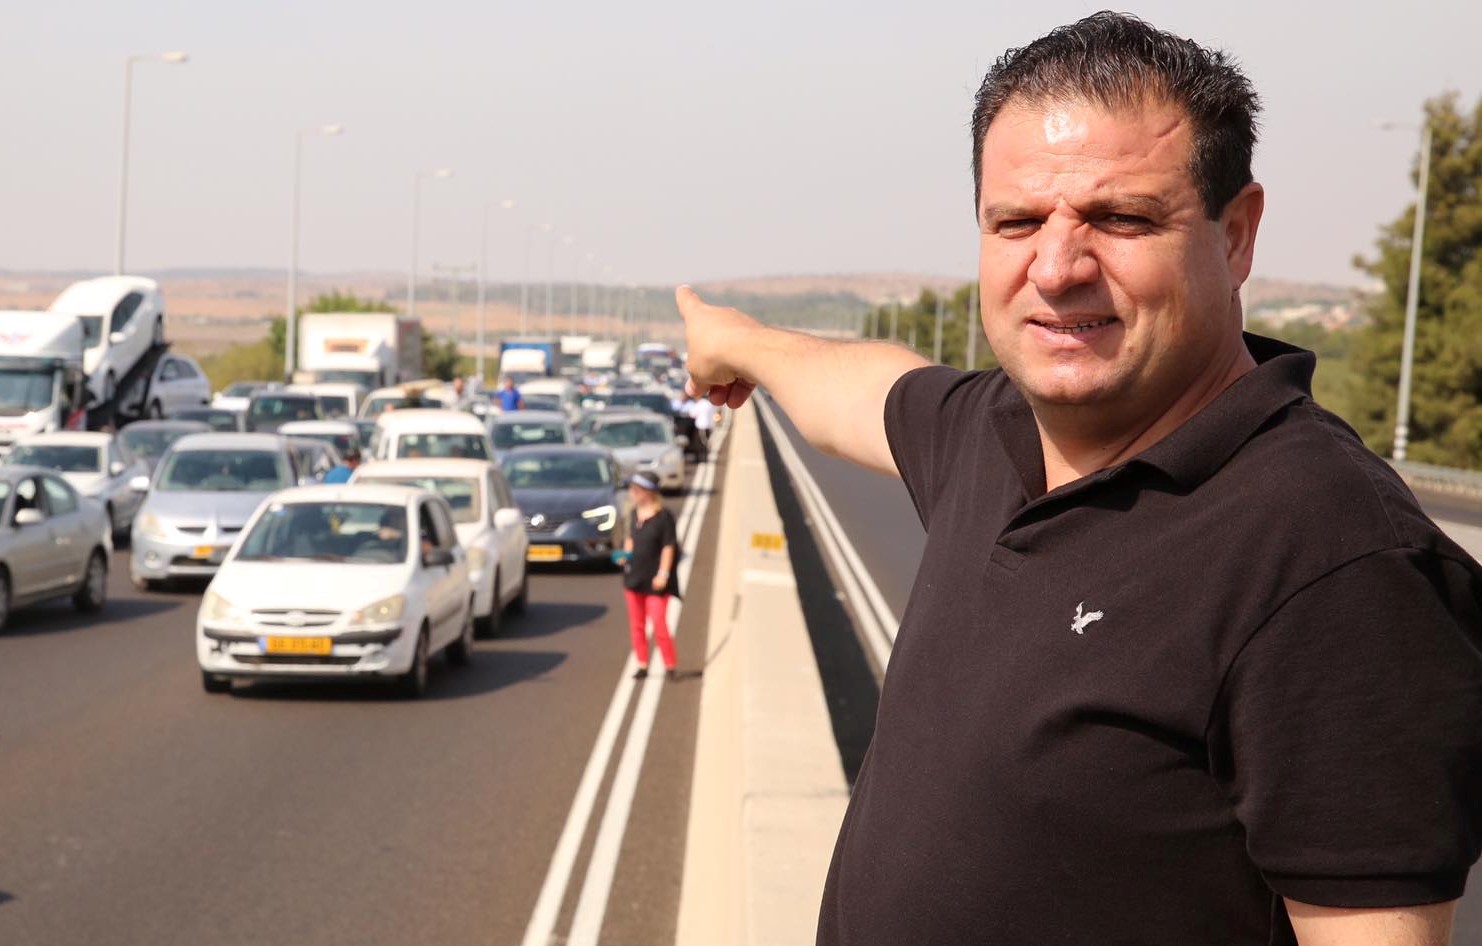 Joint List chairman MK Ayman Odeh (Hadash) with other participants in the protest convoy to Jerusalem that was held on Thursday morning, October 10